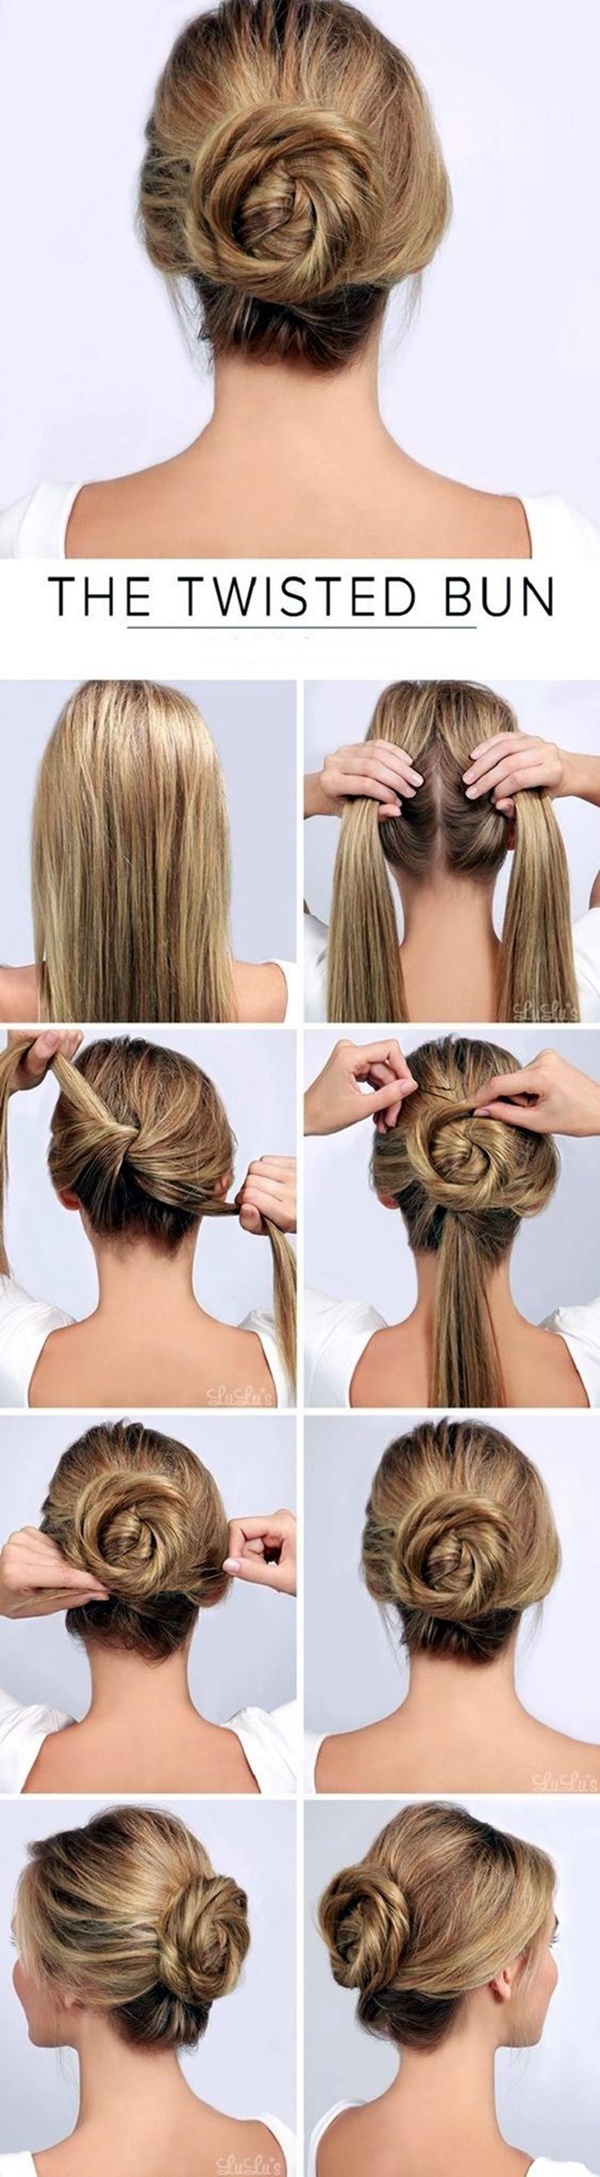 5-Minute Office Friendly Hairstyles